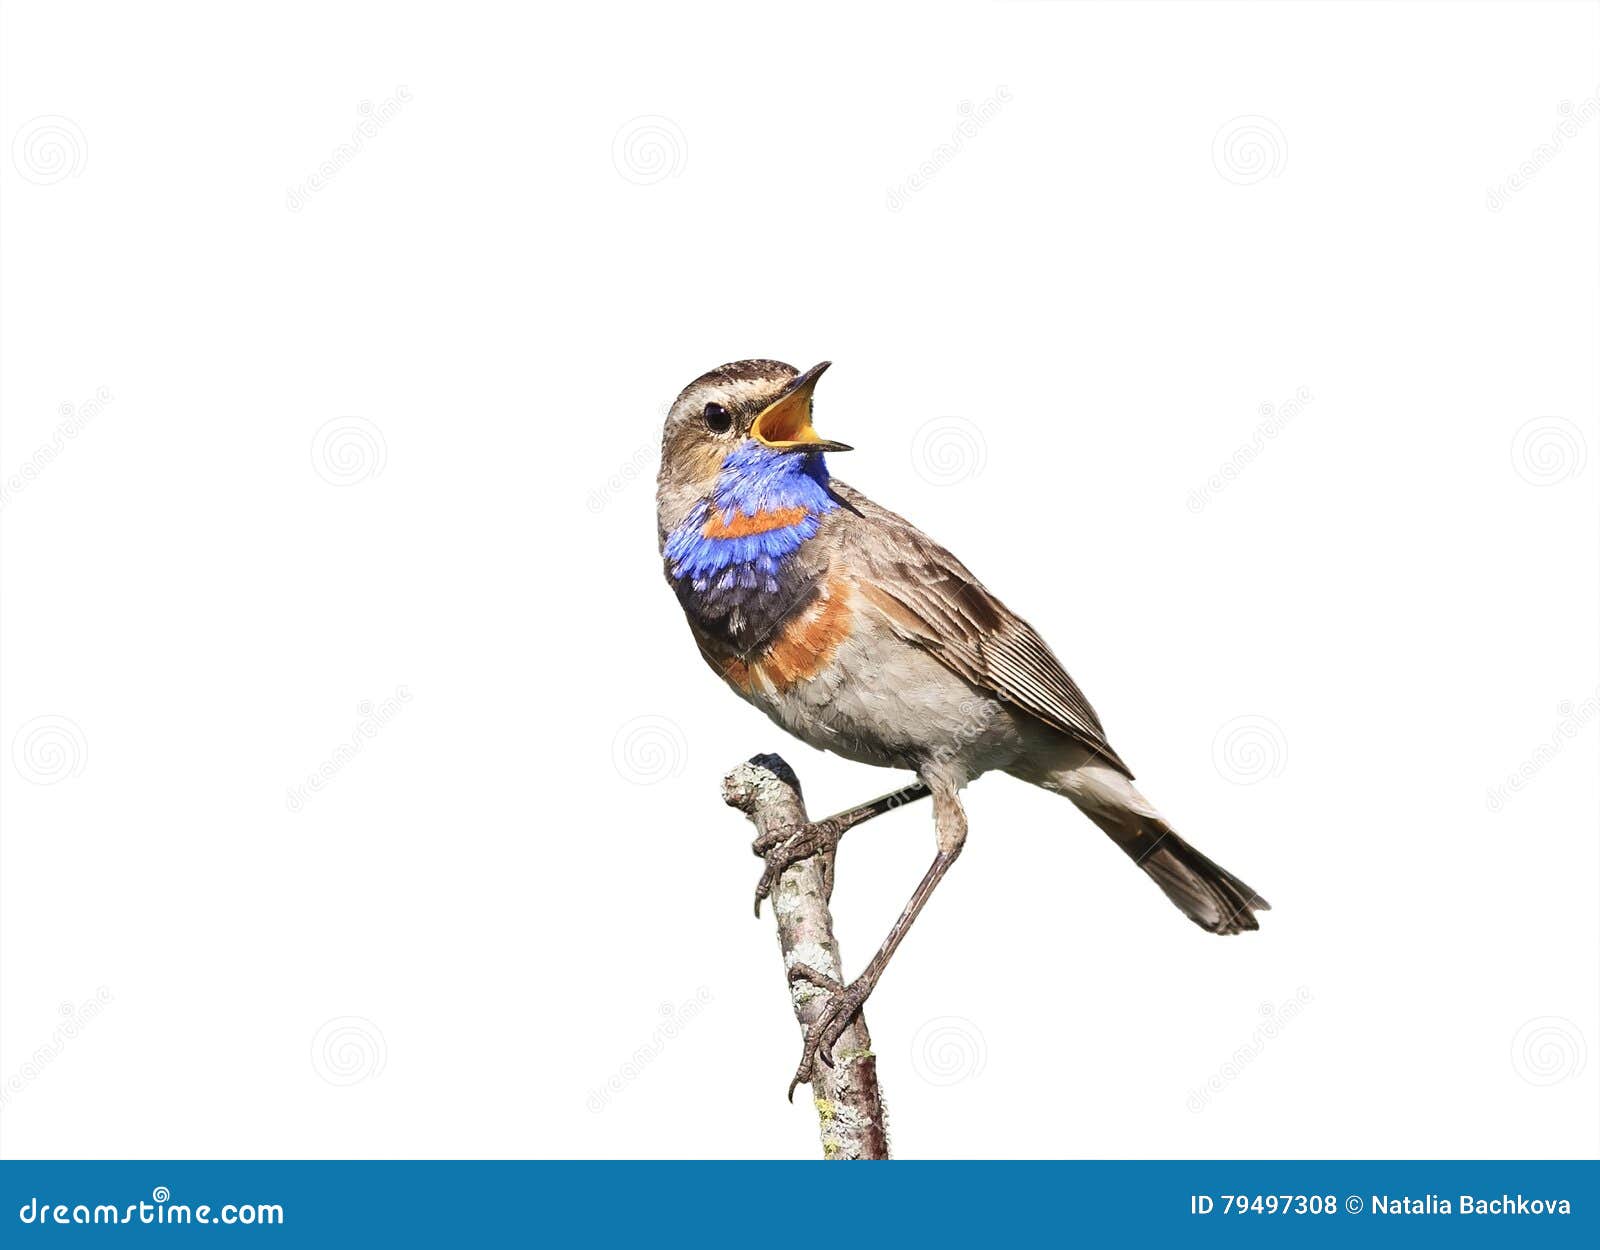 the bluethroat bird is singing sitting on a branch on white 